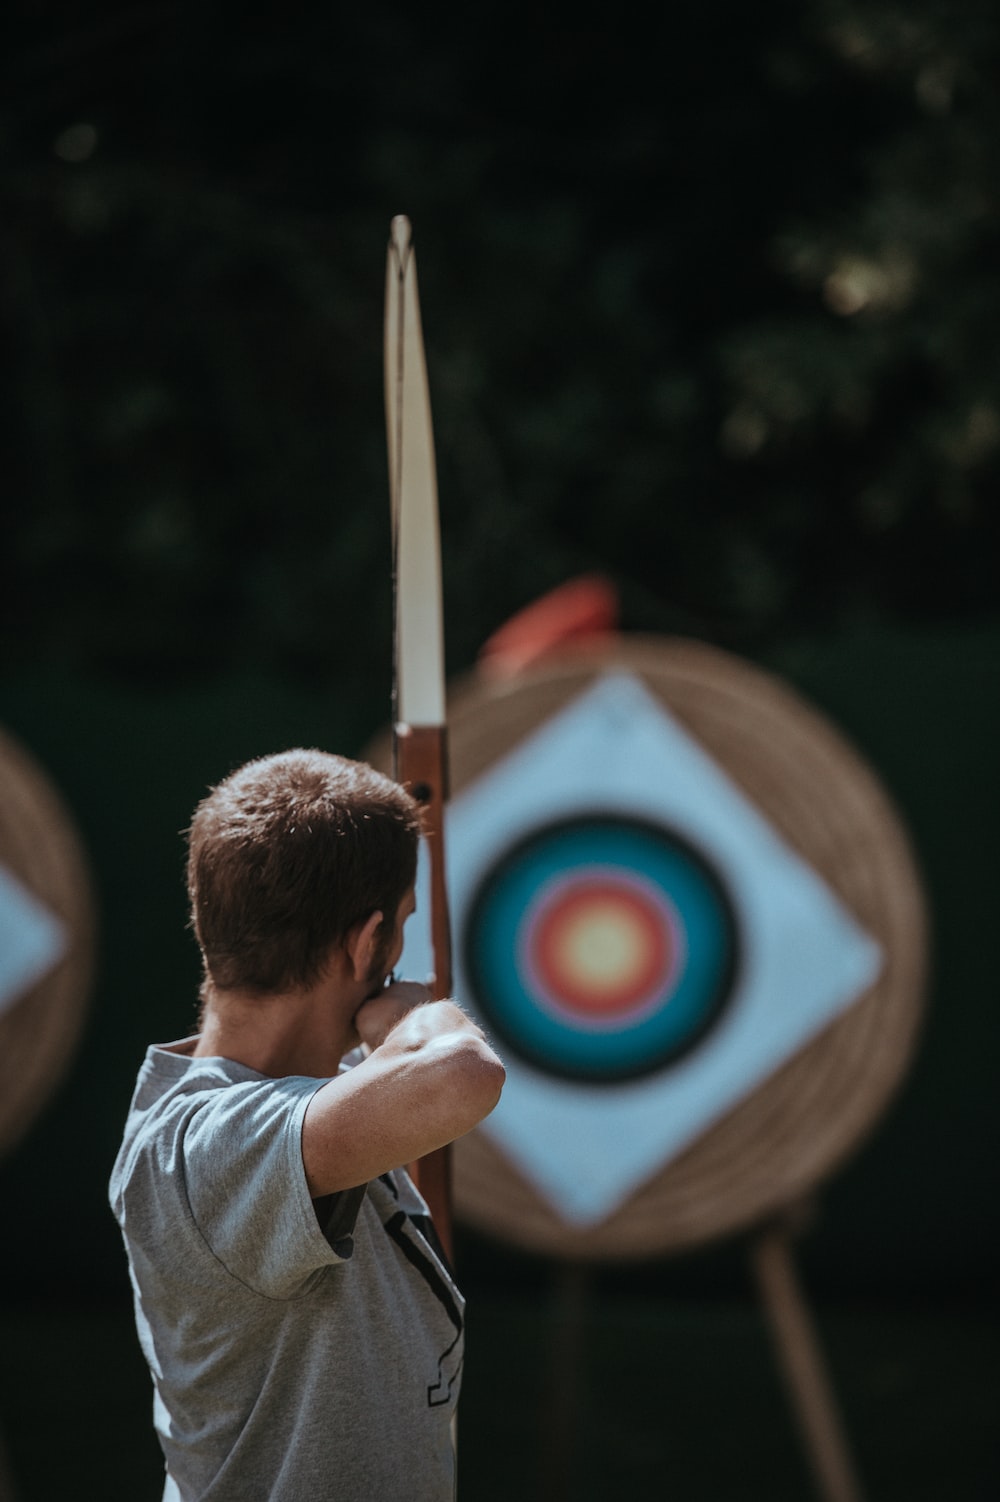 Archery pictures hd download free images on